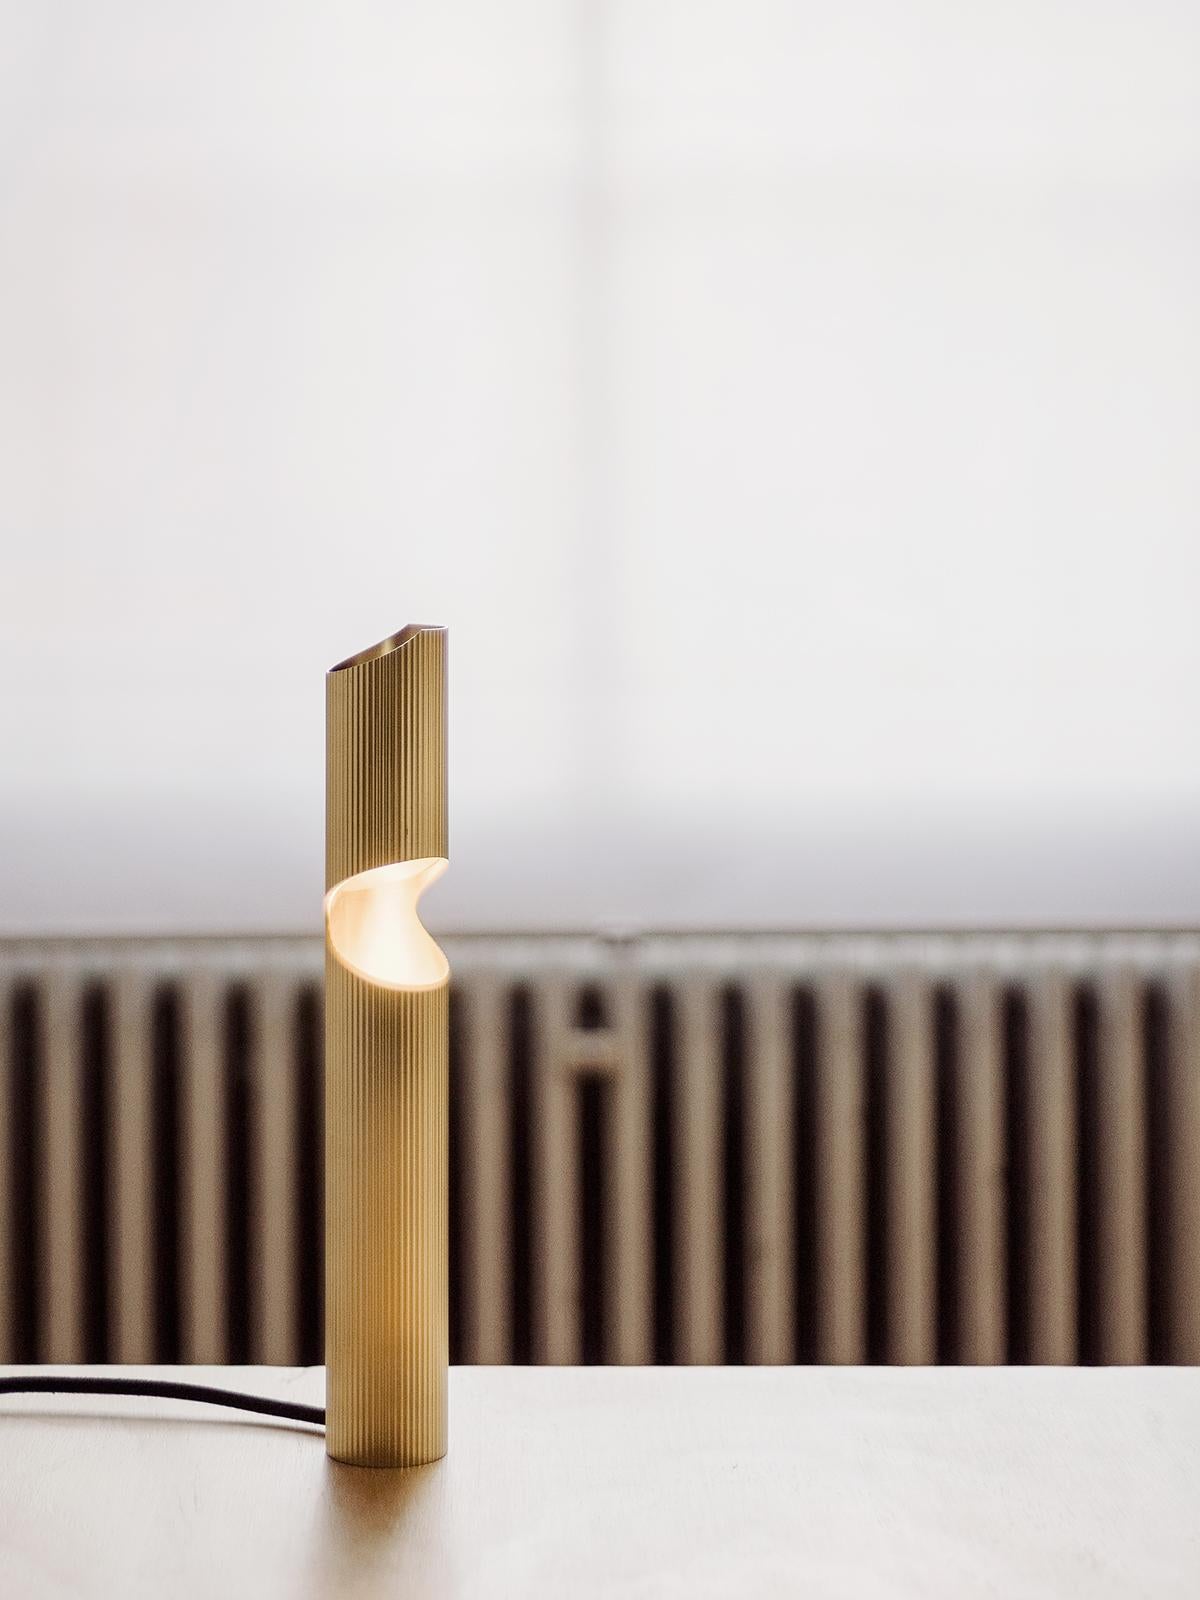 Armilla table lamp by scattered disc objects
Dimensions: Ø 5 x H 33.5 cm. 
Materials: brass striped pipes, brass mirror, aluminum, LED spot light.
Driver: 12V 12W 1A, IP67.
Light source: 1x 4.2W Led GU4 MR11 Spot 2700K 345 lumen,